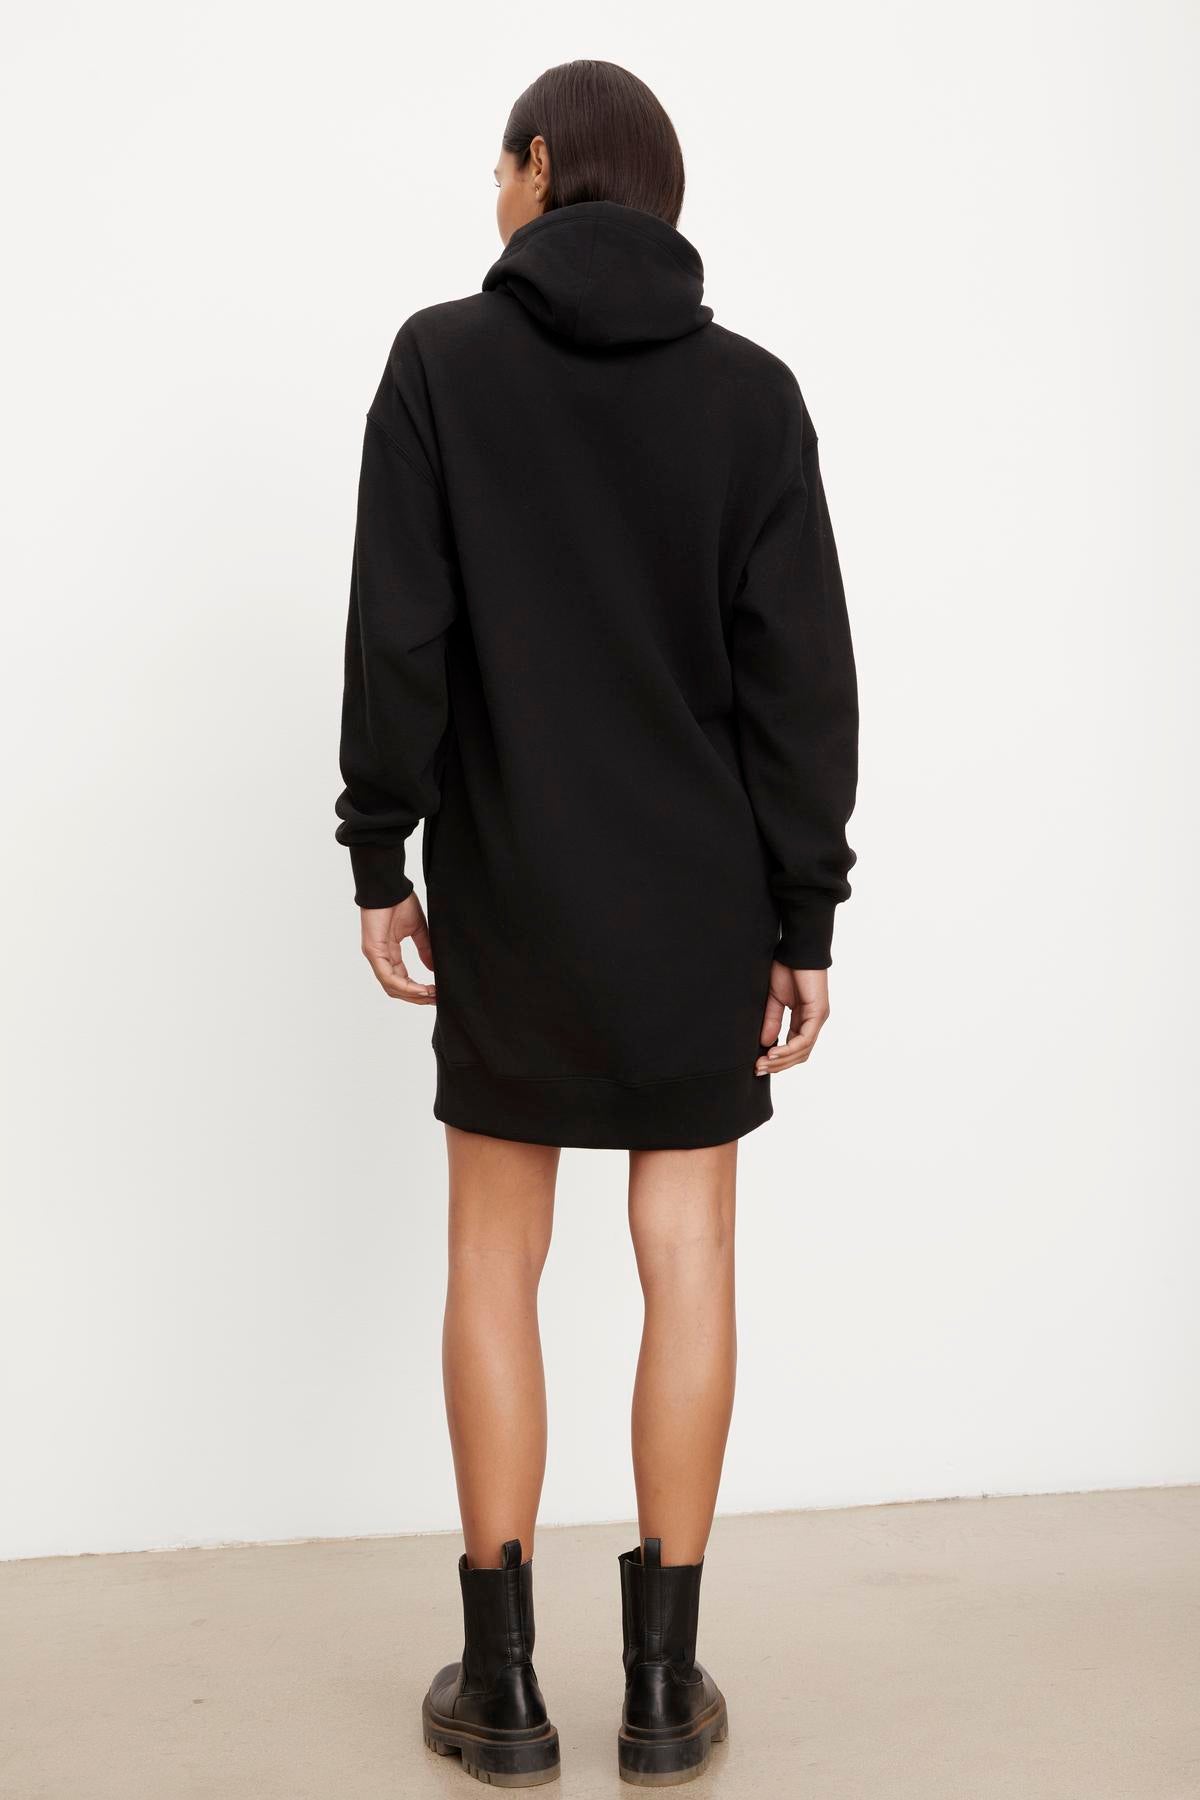 A person stands facing away from the camera, wearing a long black YARA SOFT FLEECE HOODIE DRESS by Velvet by Graham & Spencer and black boots, against a plain white background.-35696174432449